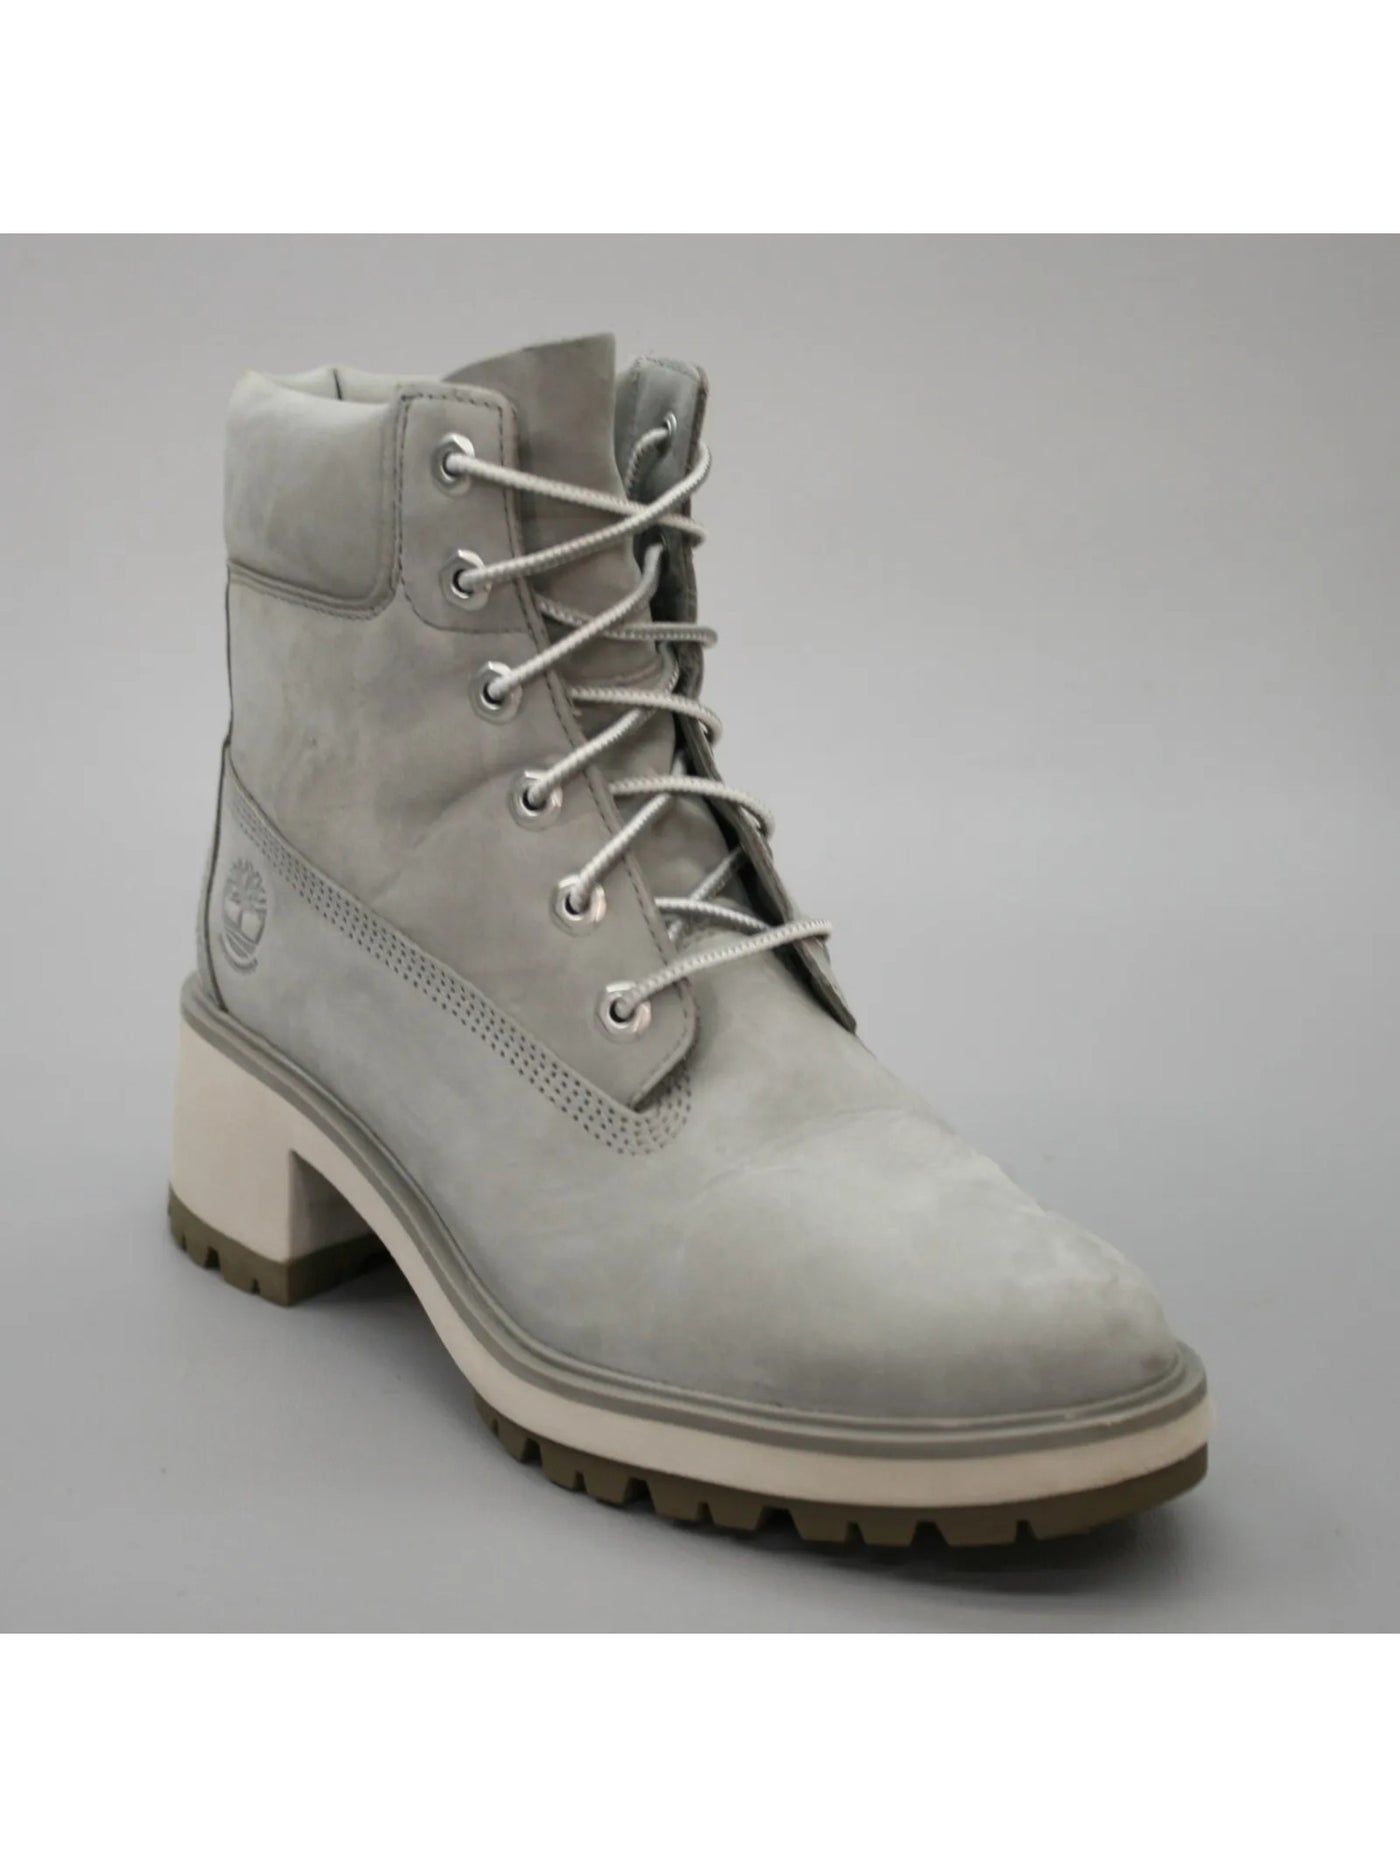 TIMBERLAND Womens Gray Padded Lug Sole Waterproof Kinsley Round Toe Block Heel Lace-Up Leather Boots Shoes 10 M